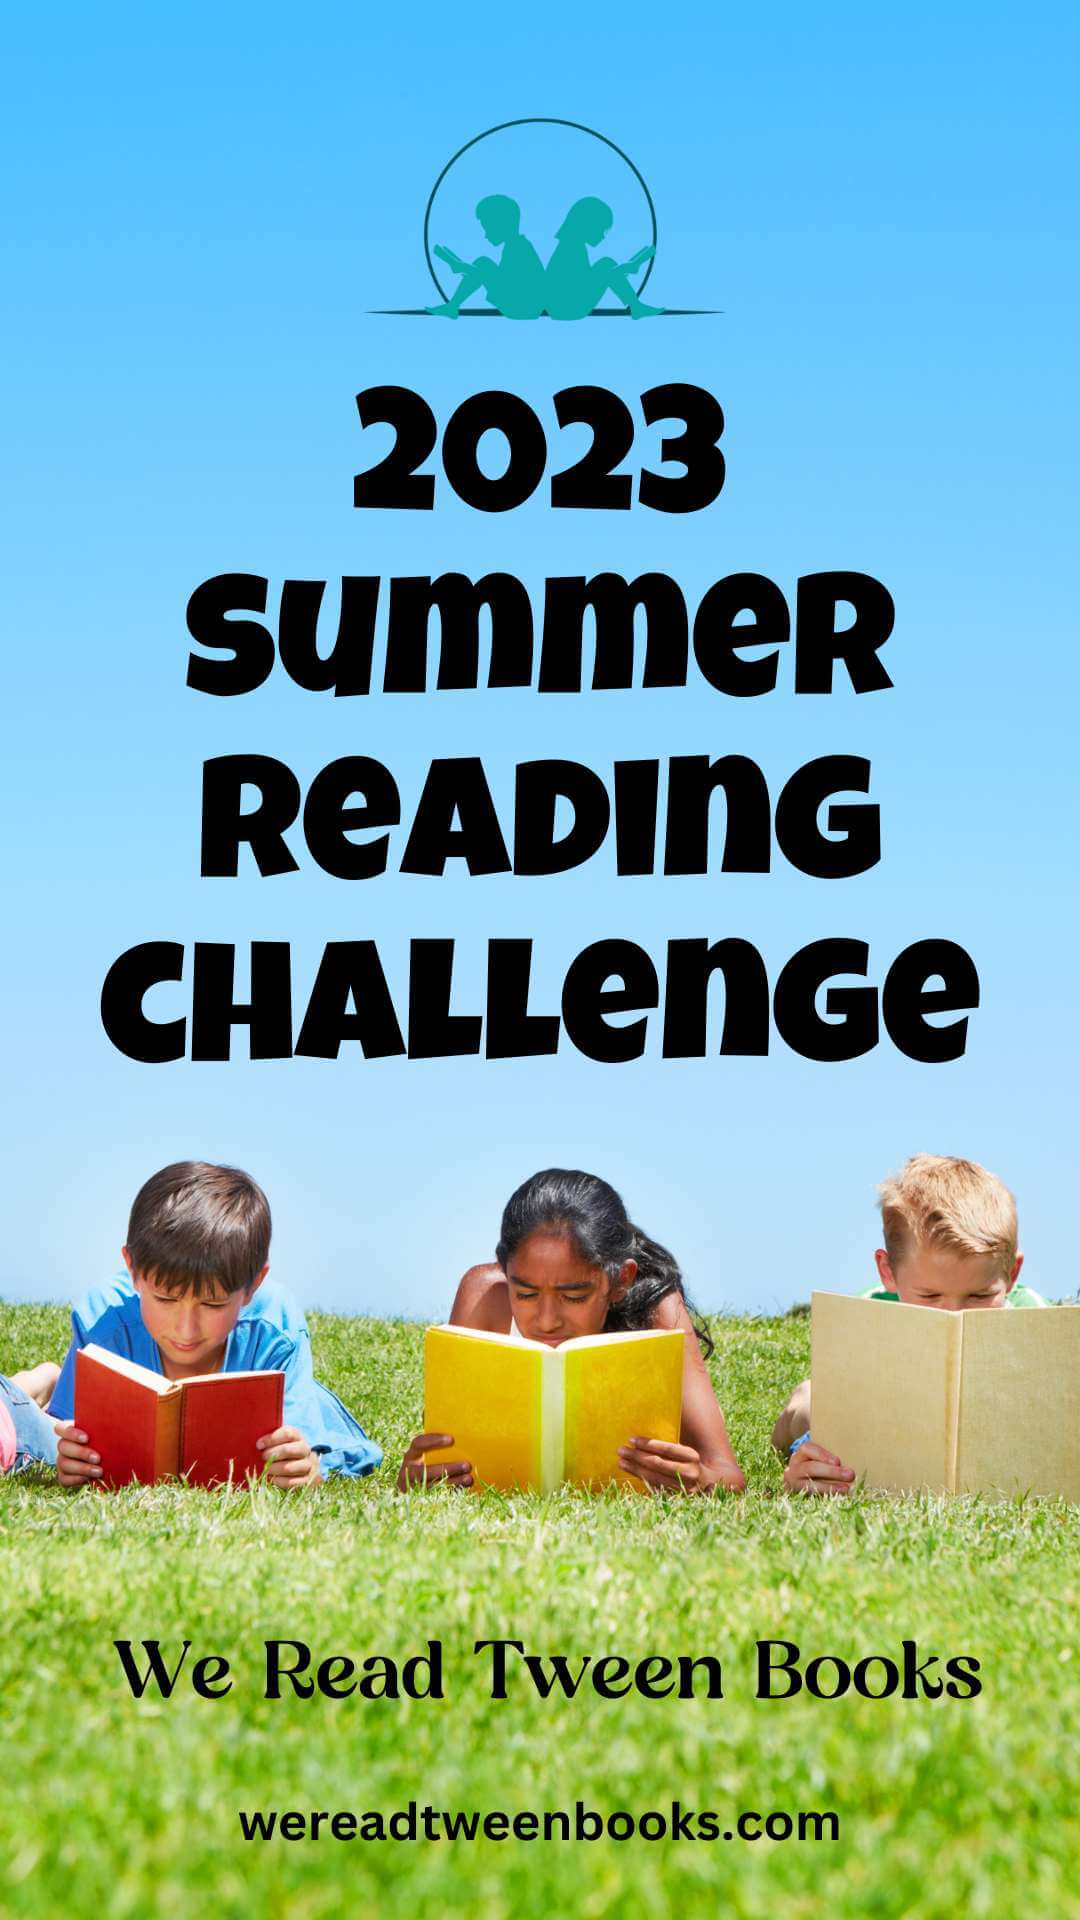 Check out the 2023 summer reading list for tweens and join the We Read Tween Books Summer Reading Challenge!